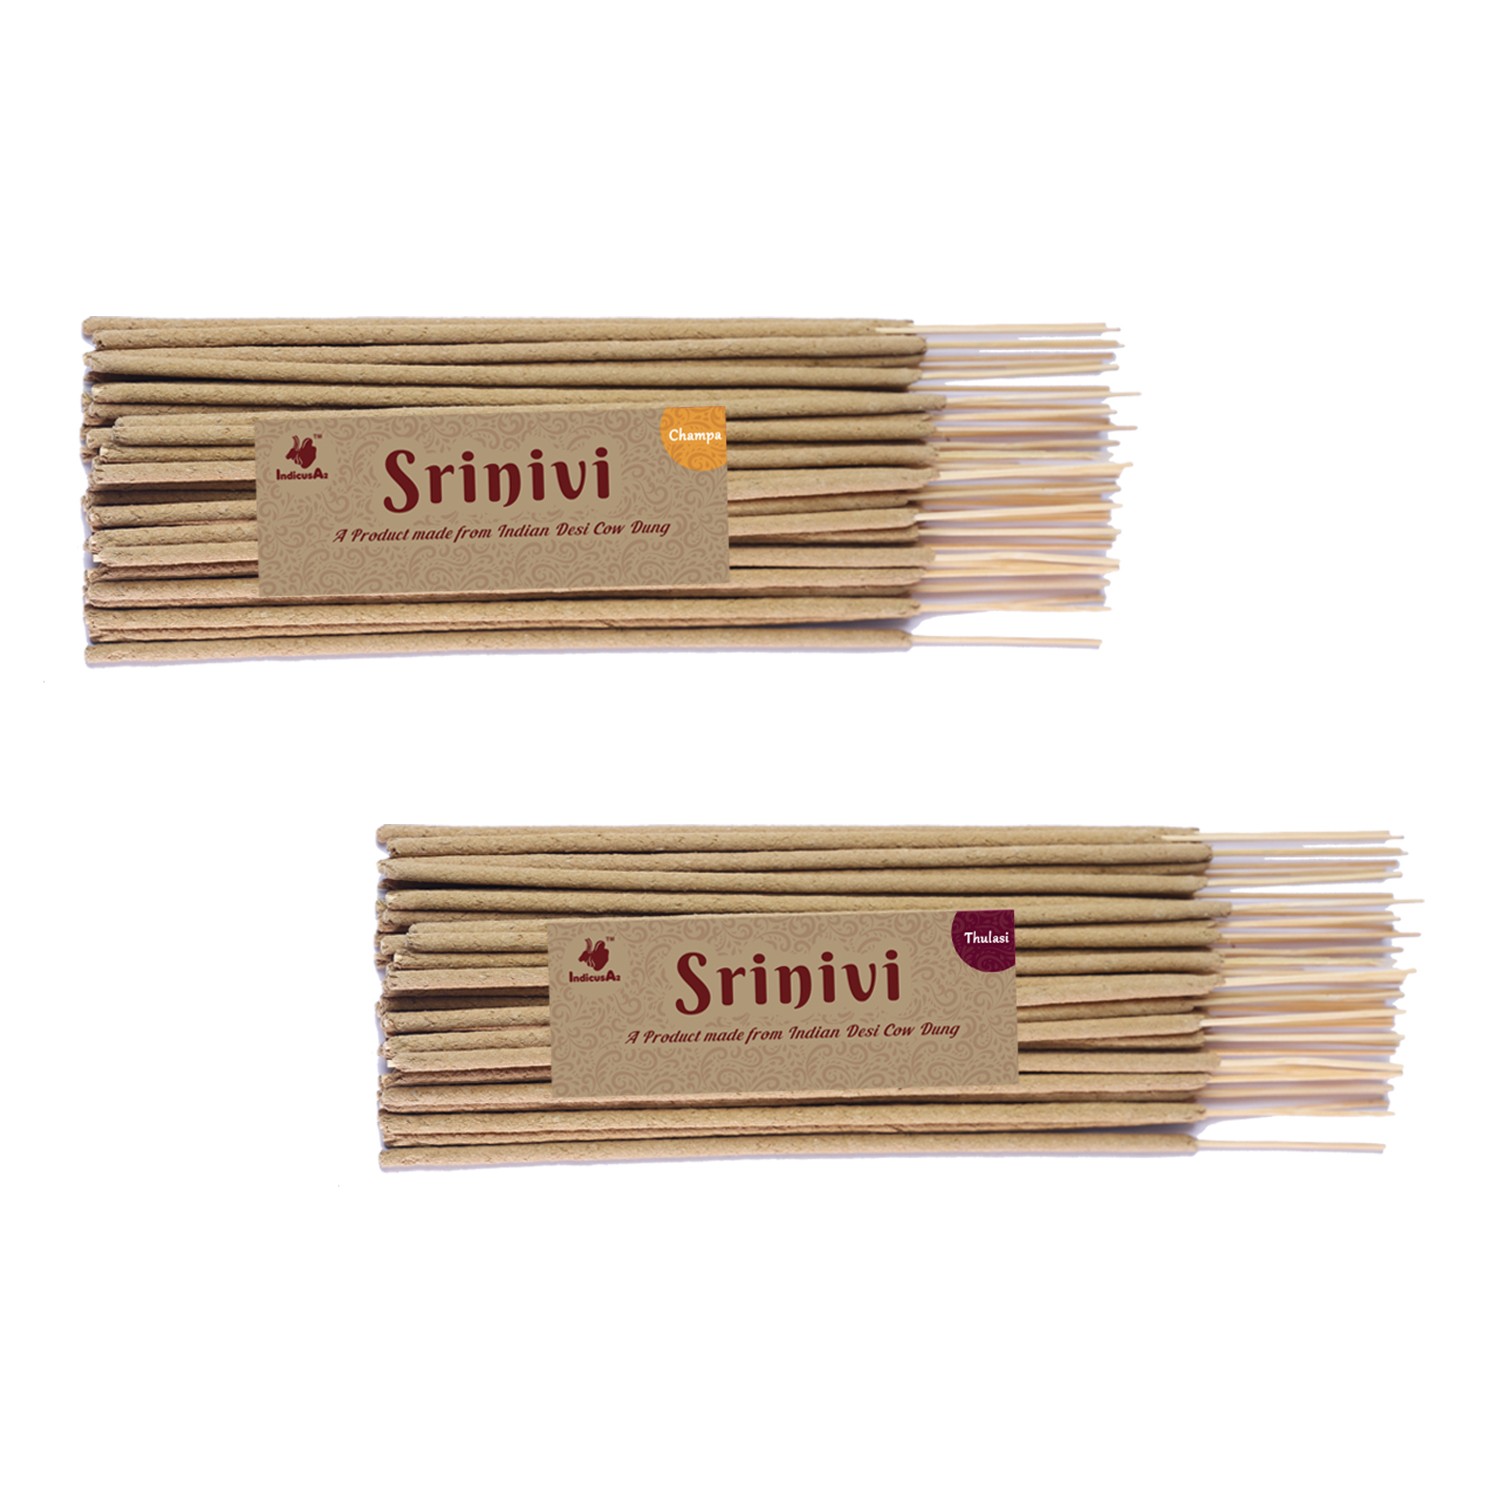 Srinivi Agarbattis - Made up of desi cow dung|Pack of 2|Each pack consists of 35 sticks|Fragrance – Champa, Thulasi.